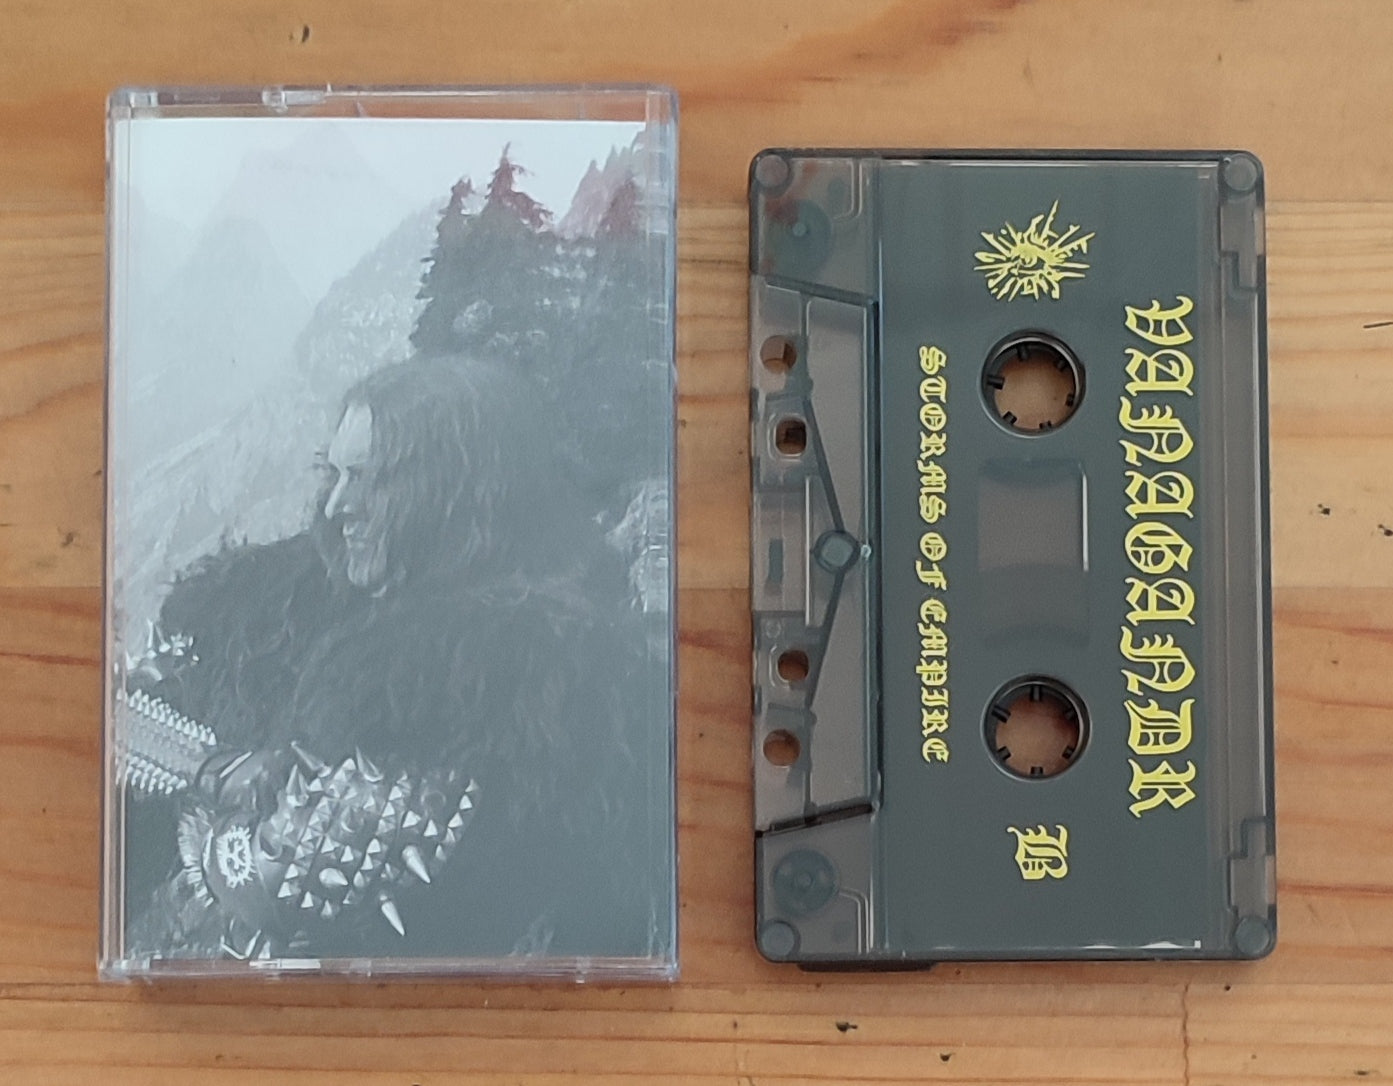 Vanagandr (US) "Storms of Empire" - Pro tape *New in Stock*